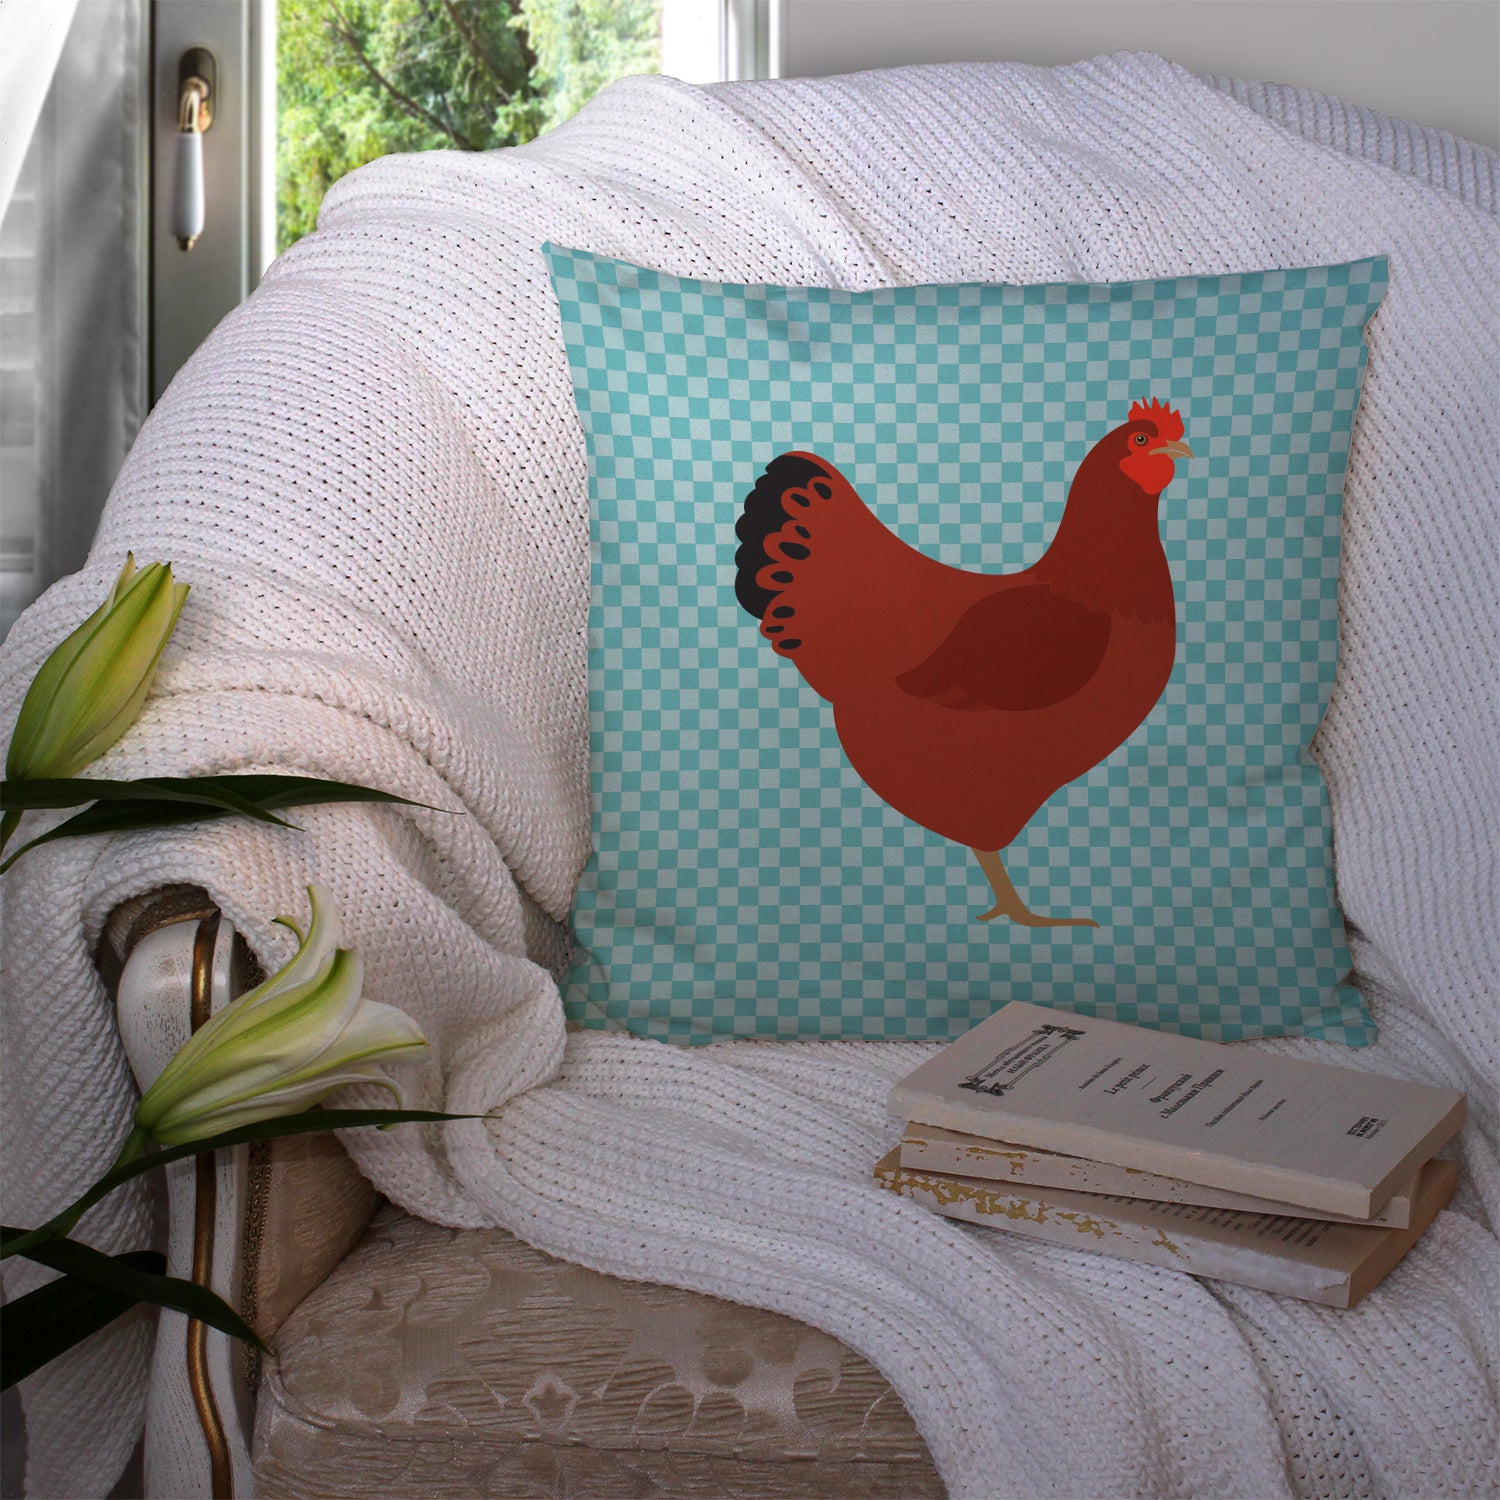 New Hampshire Red Chicken Blue Check Fabric Decorative Pillow BB8017PW1414 - the-store.com